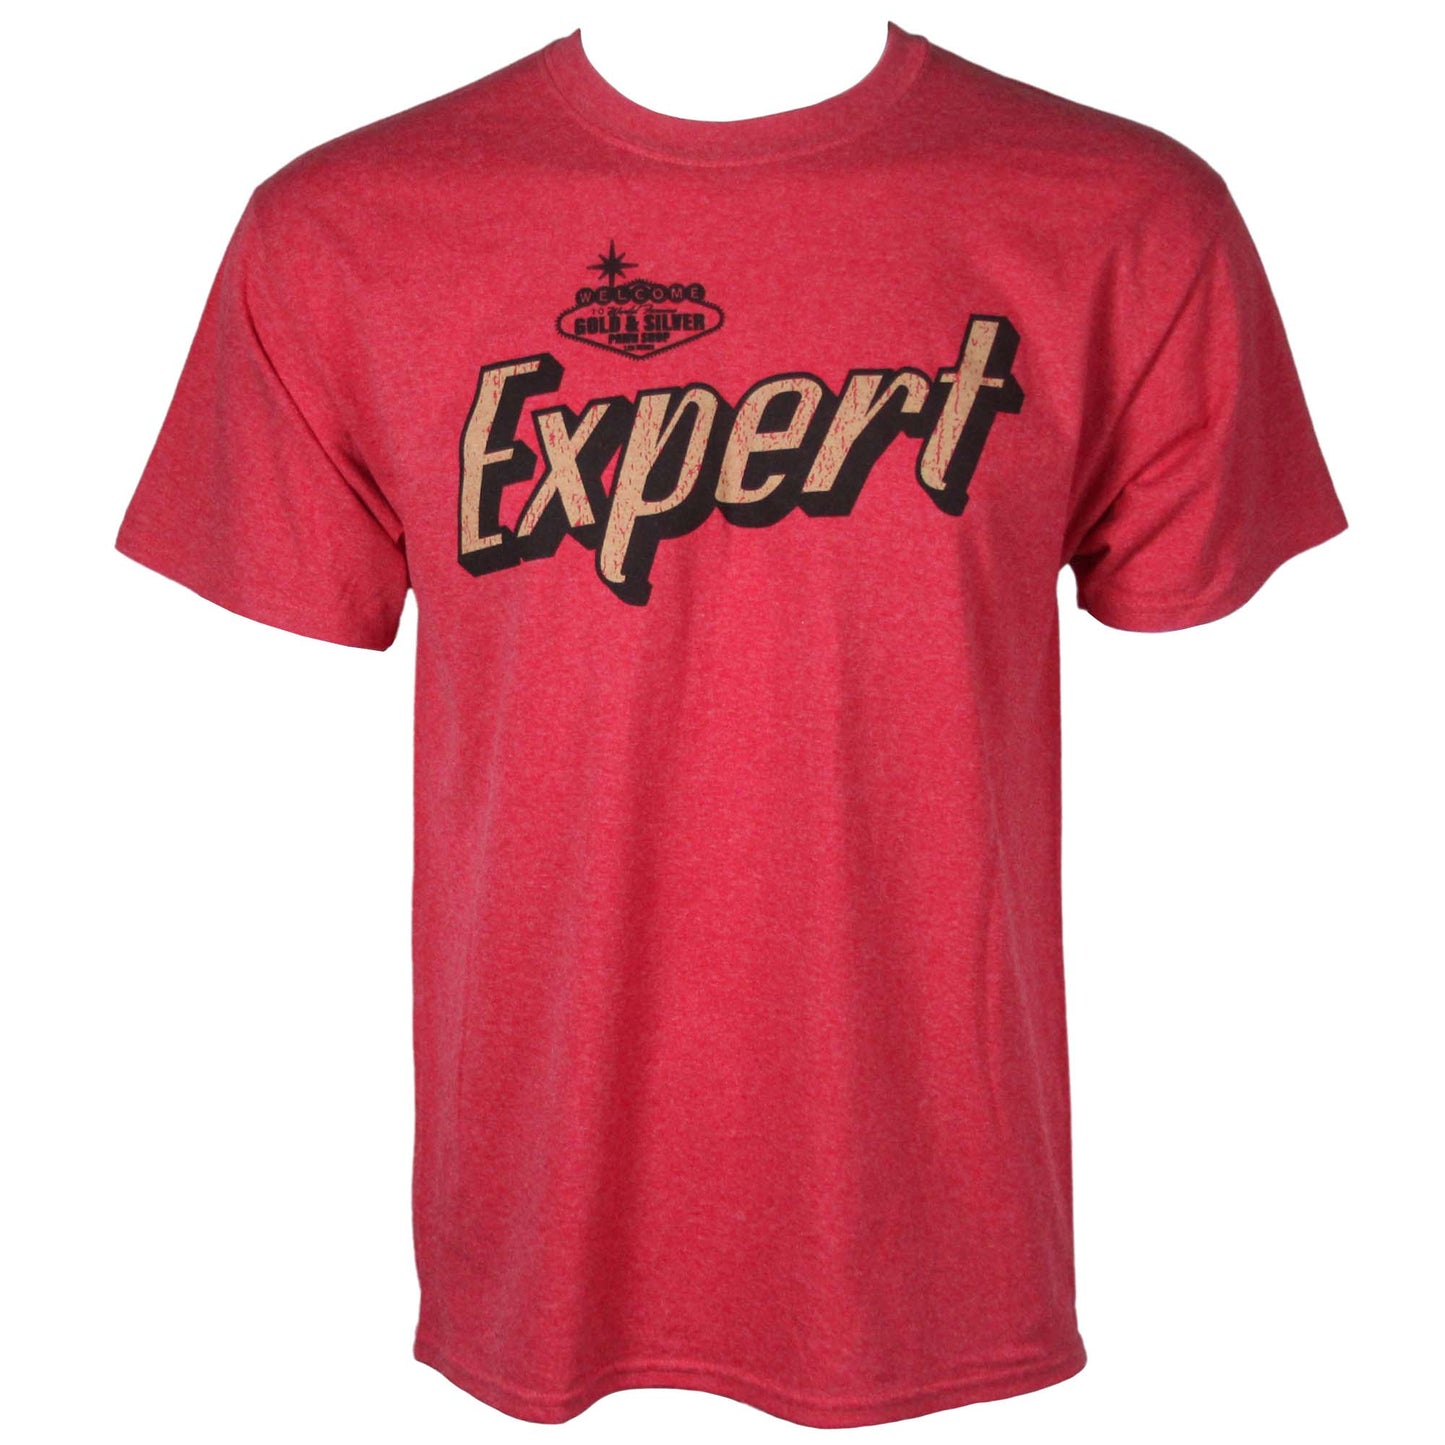 Gold & Silver Pawn Shop "Expert" Round Neck T-Shirt Red